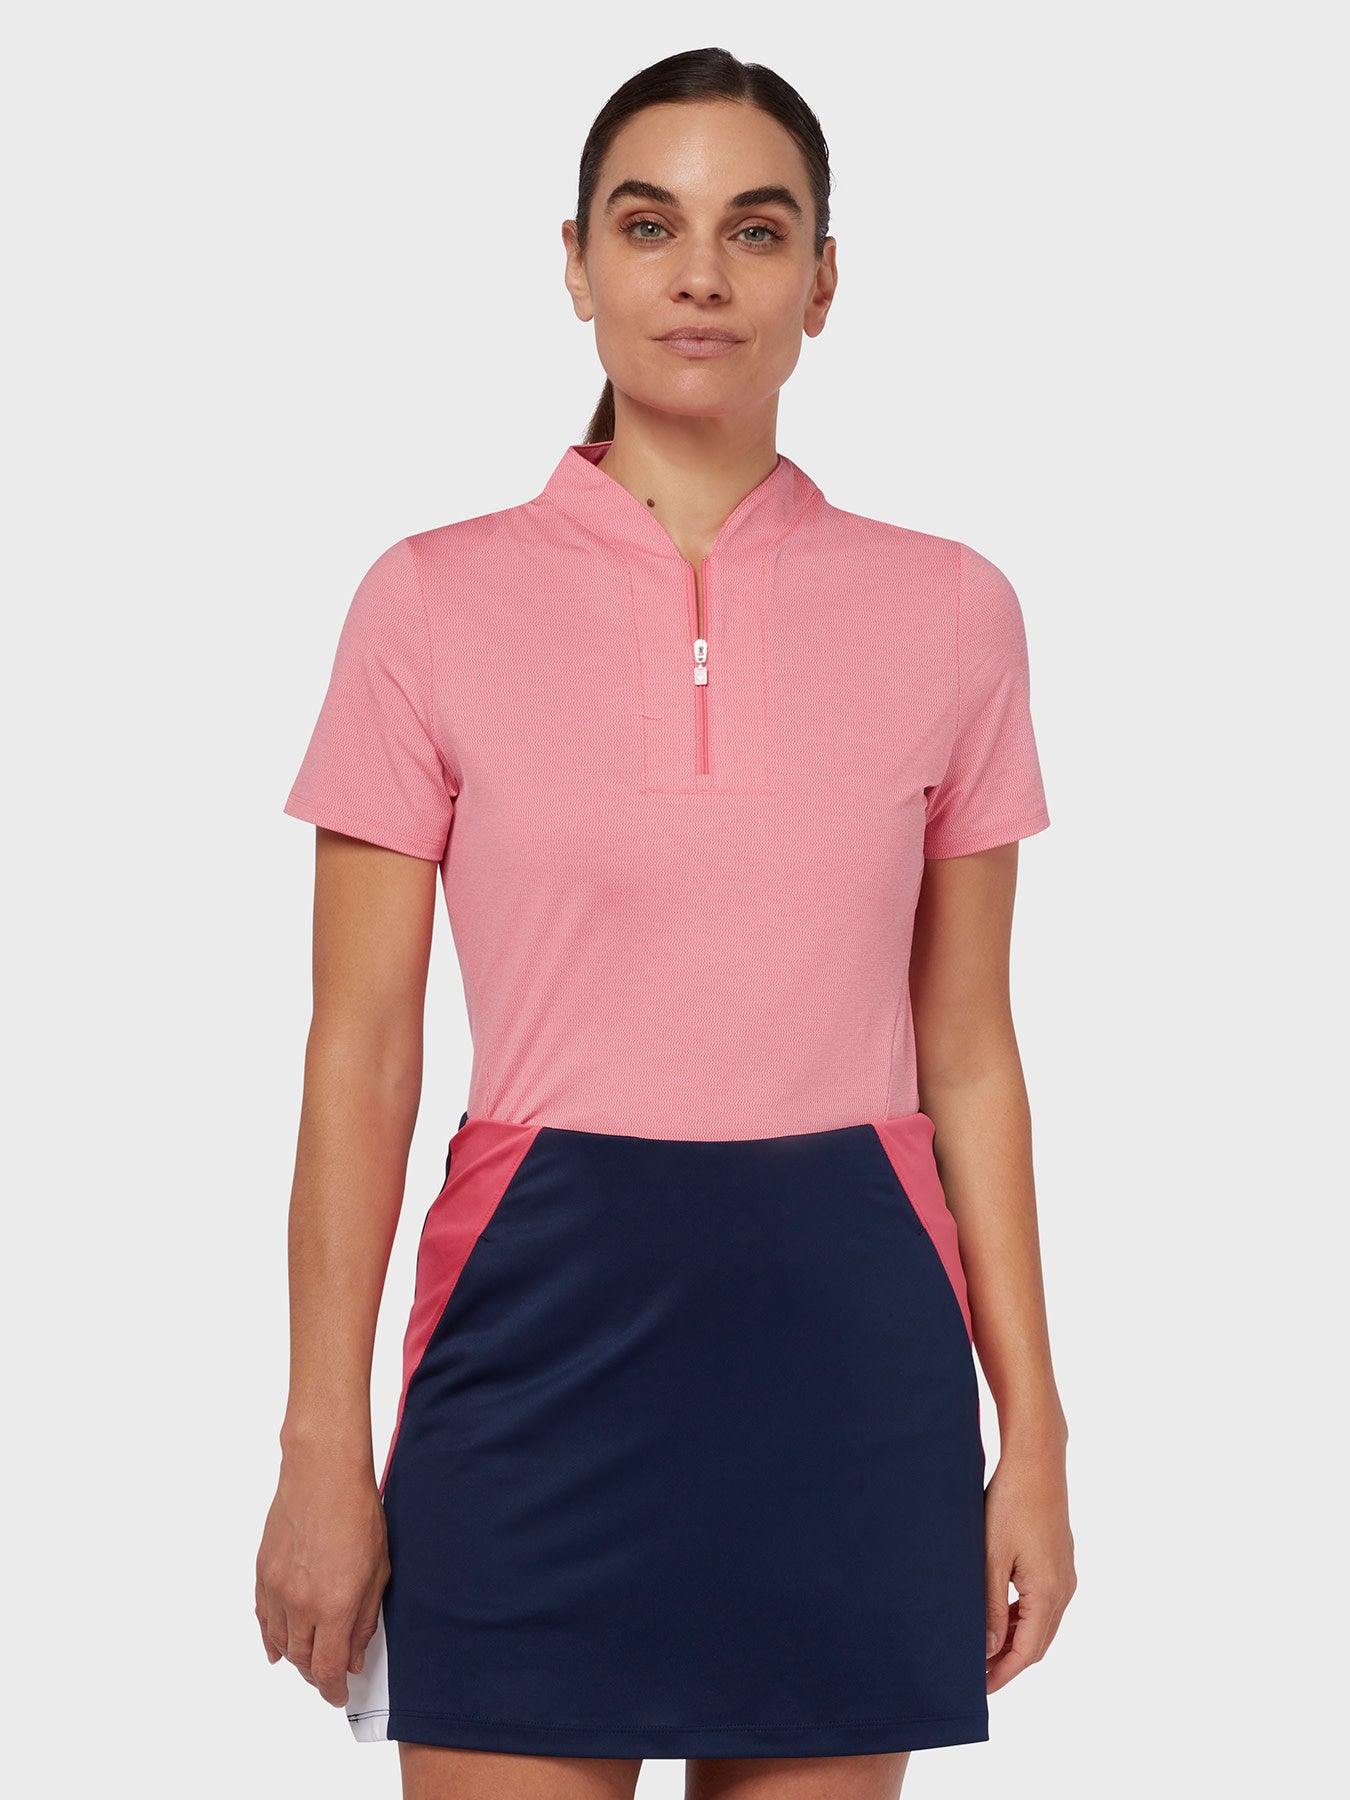 View Tonal Texture Heather Polo Top In Fruit Dove Heather Fruit Dove Htr XS information